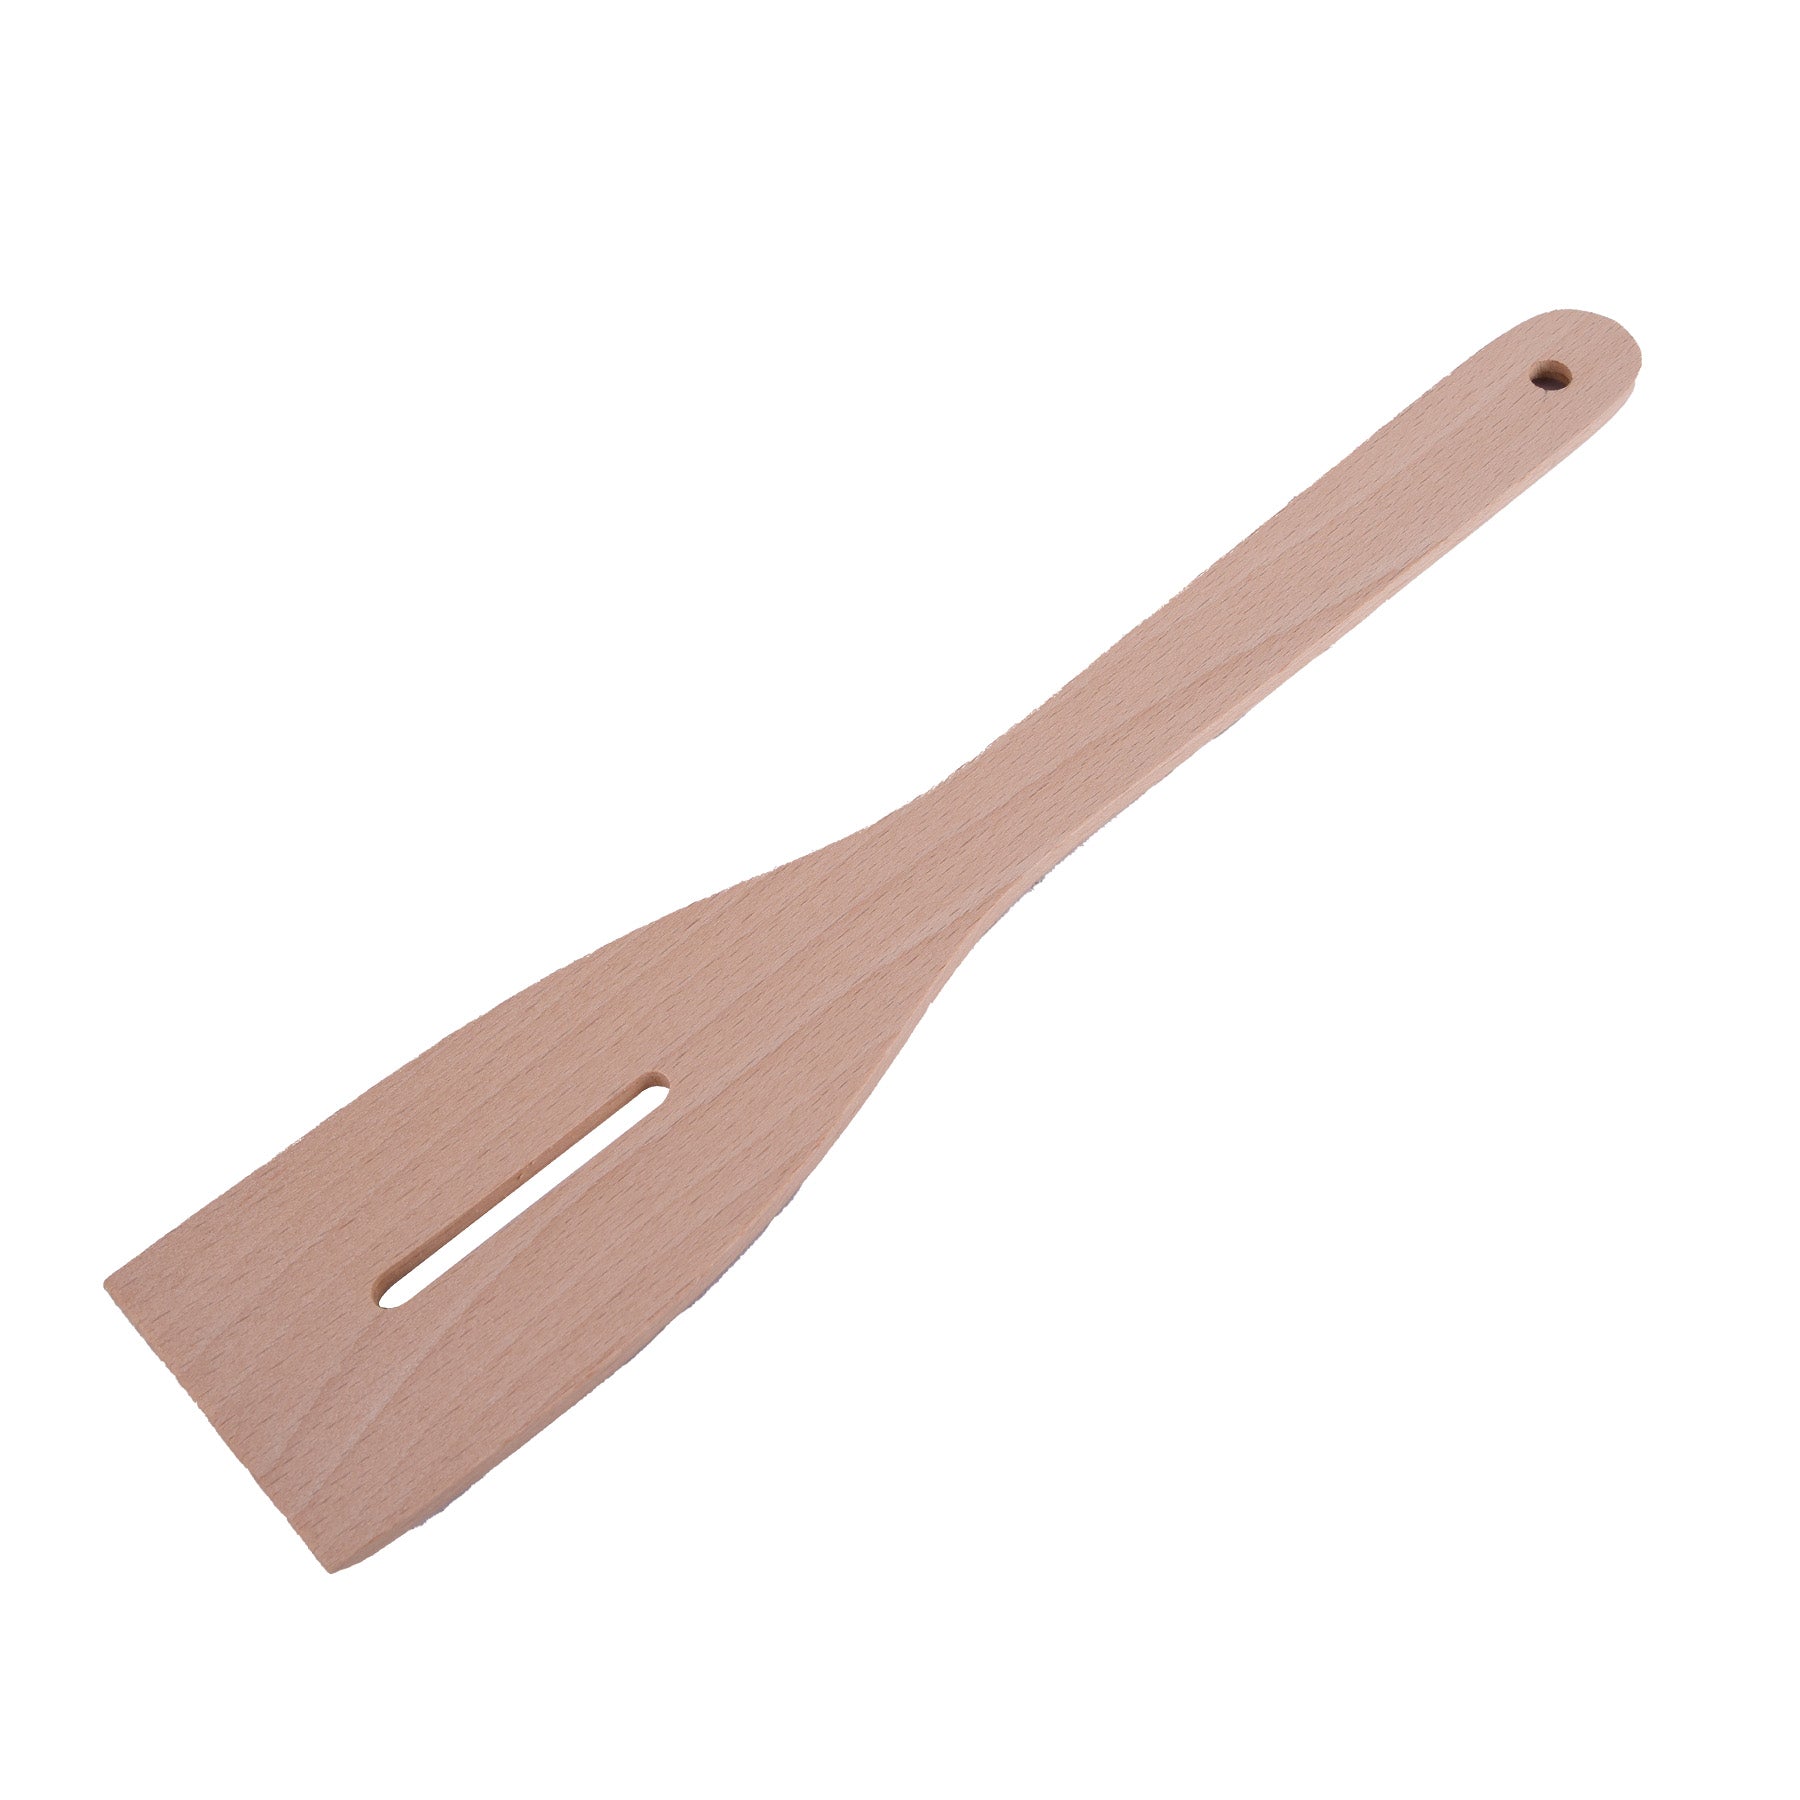 Wooden spatula with cut, NaturalSize: 30 cm